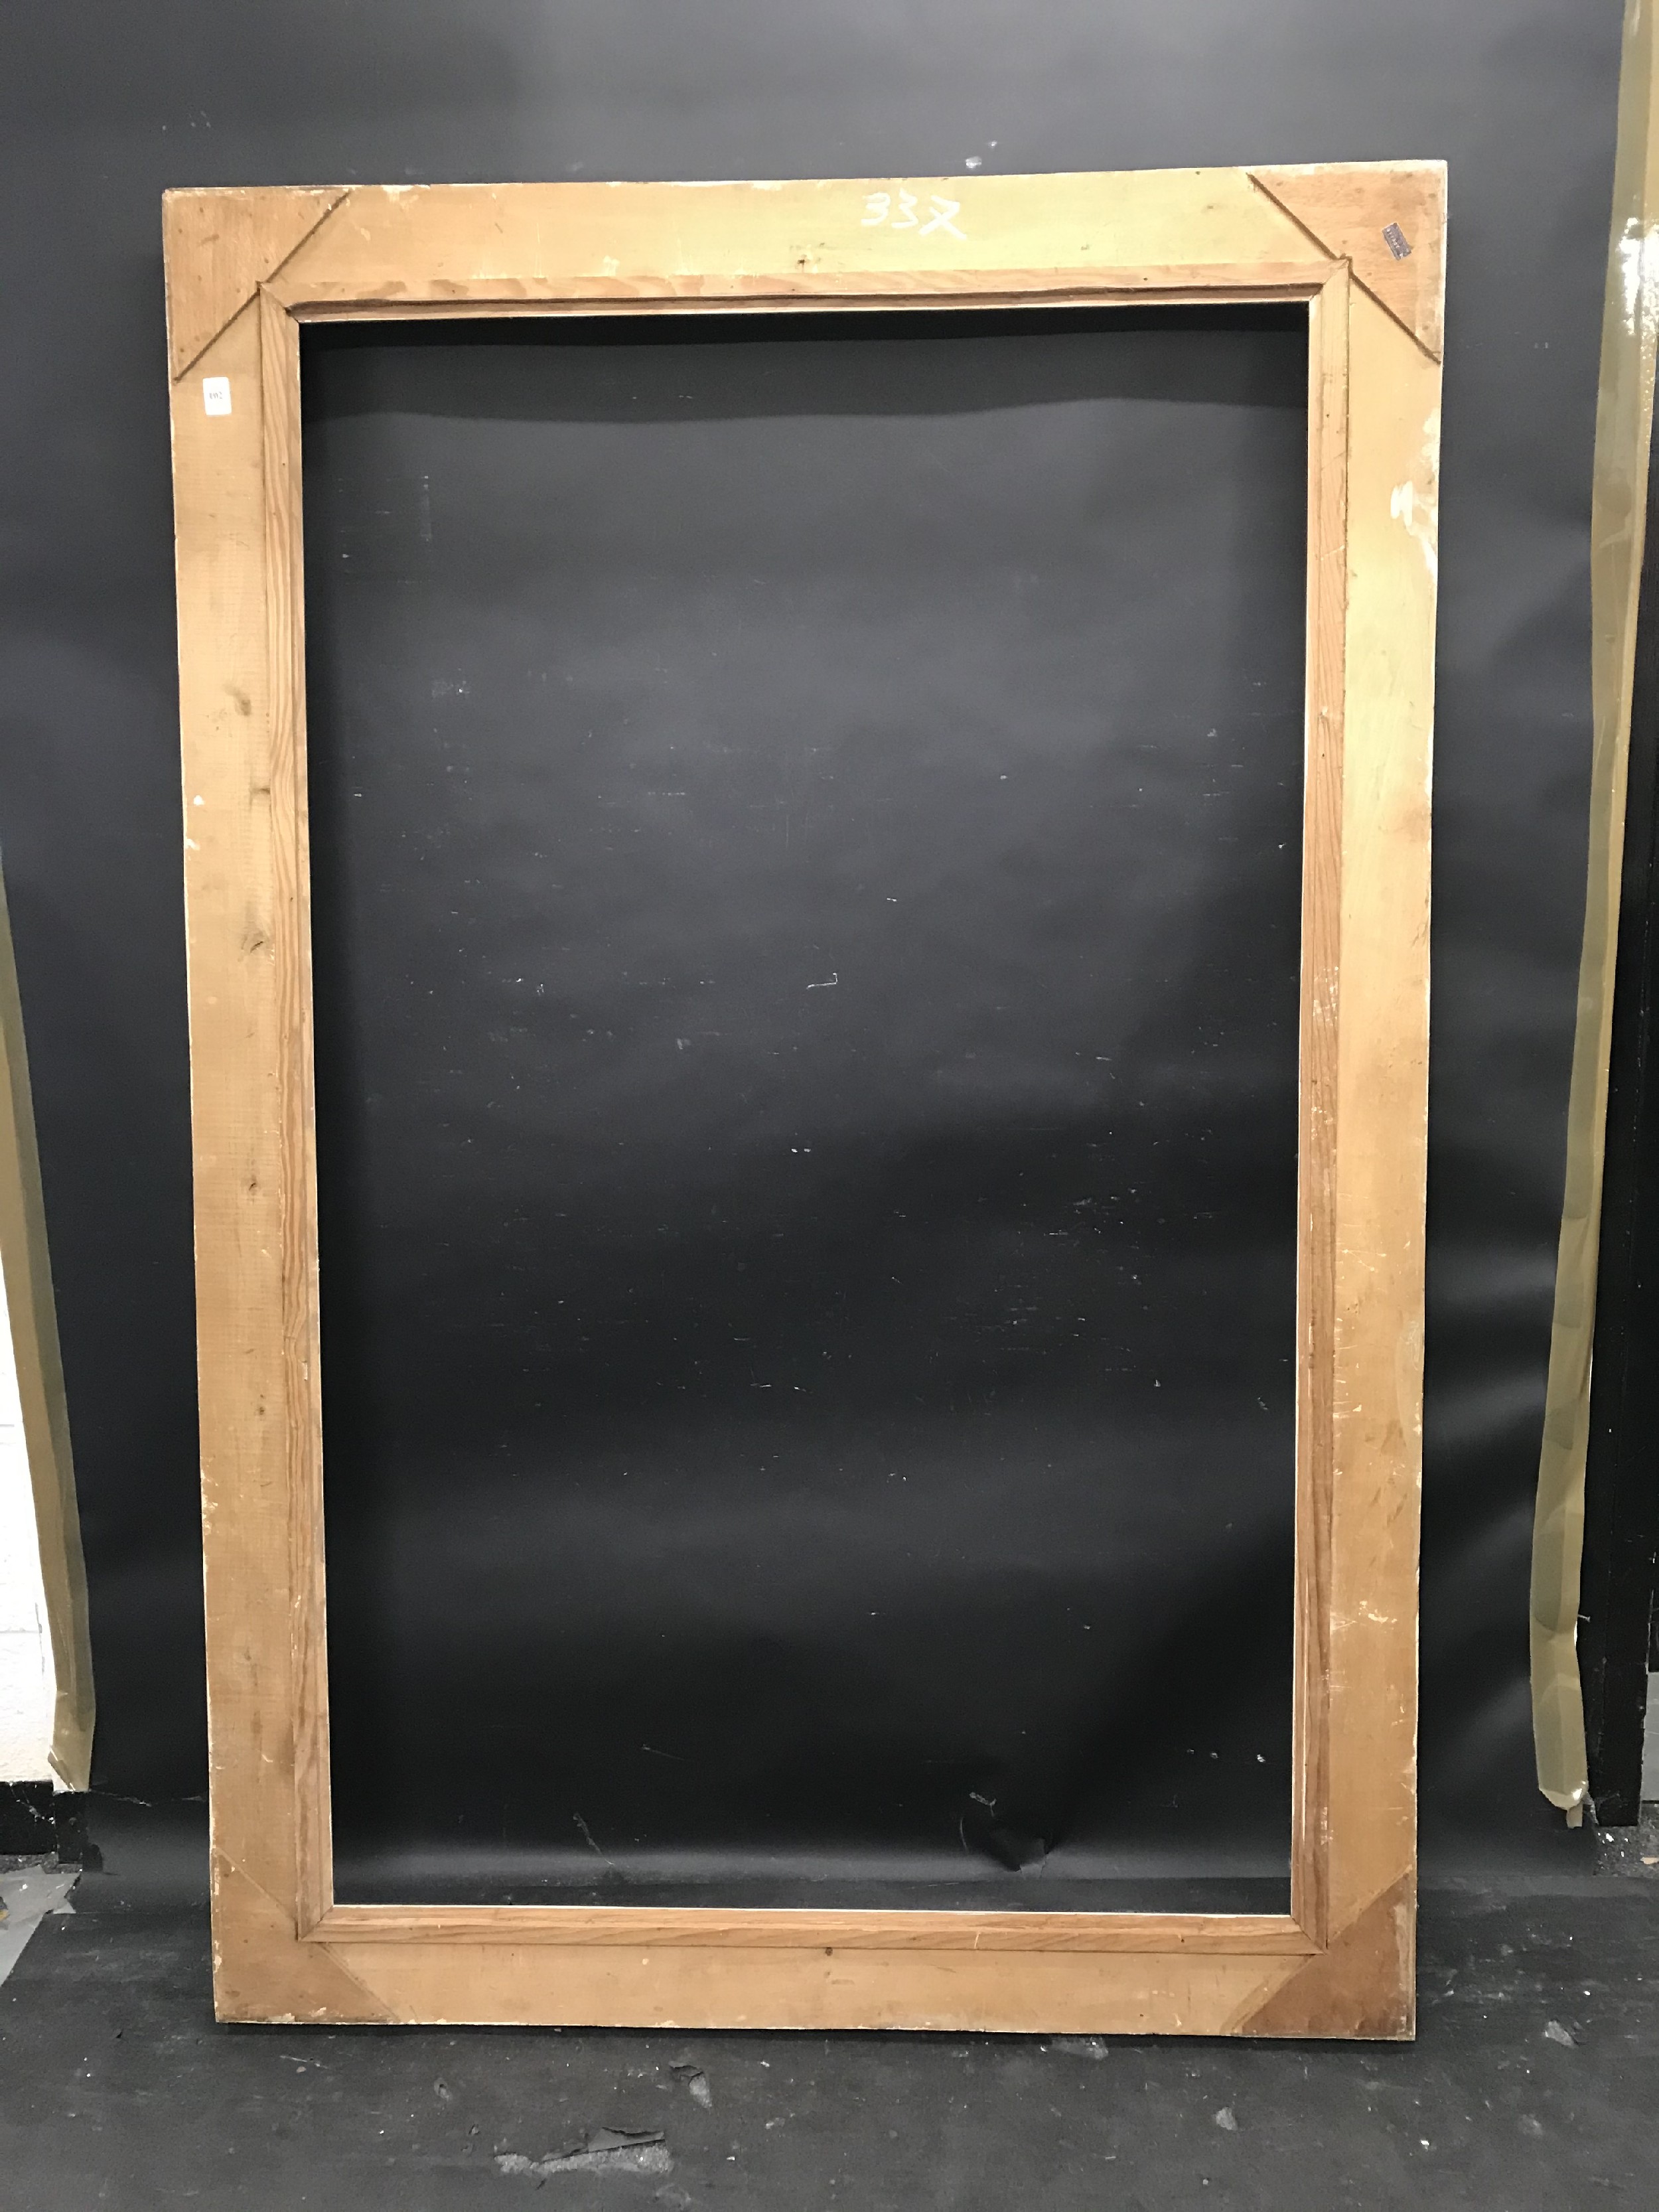 20th Century French School. A Gilt and Painted Frame, 57.25" x 35.25" (rebate). - Image 3 of 3